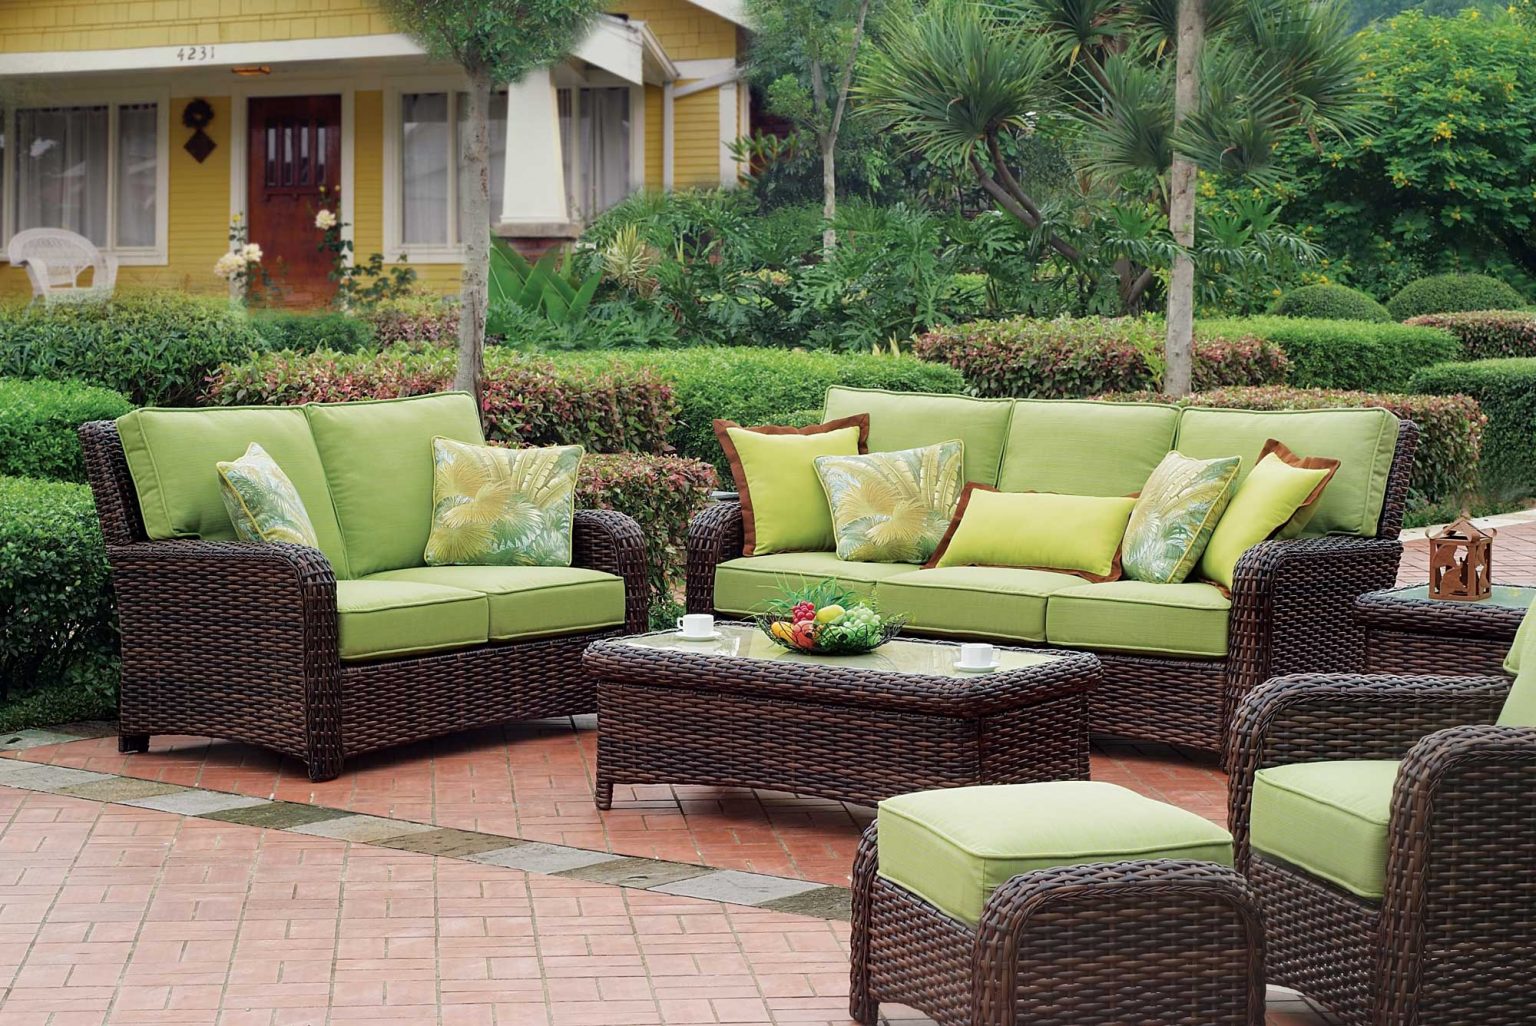 Outdoor Furniture In Bangalore 1536x1026 